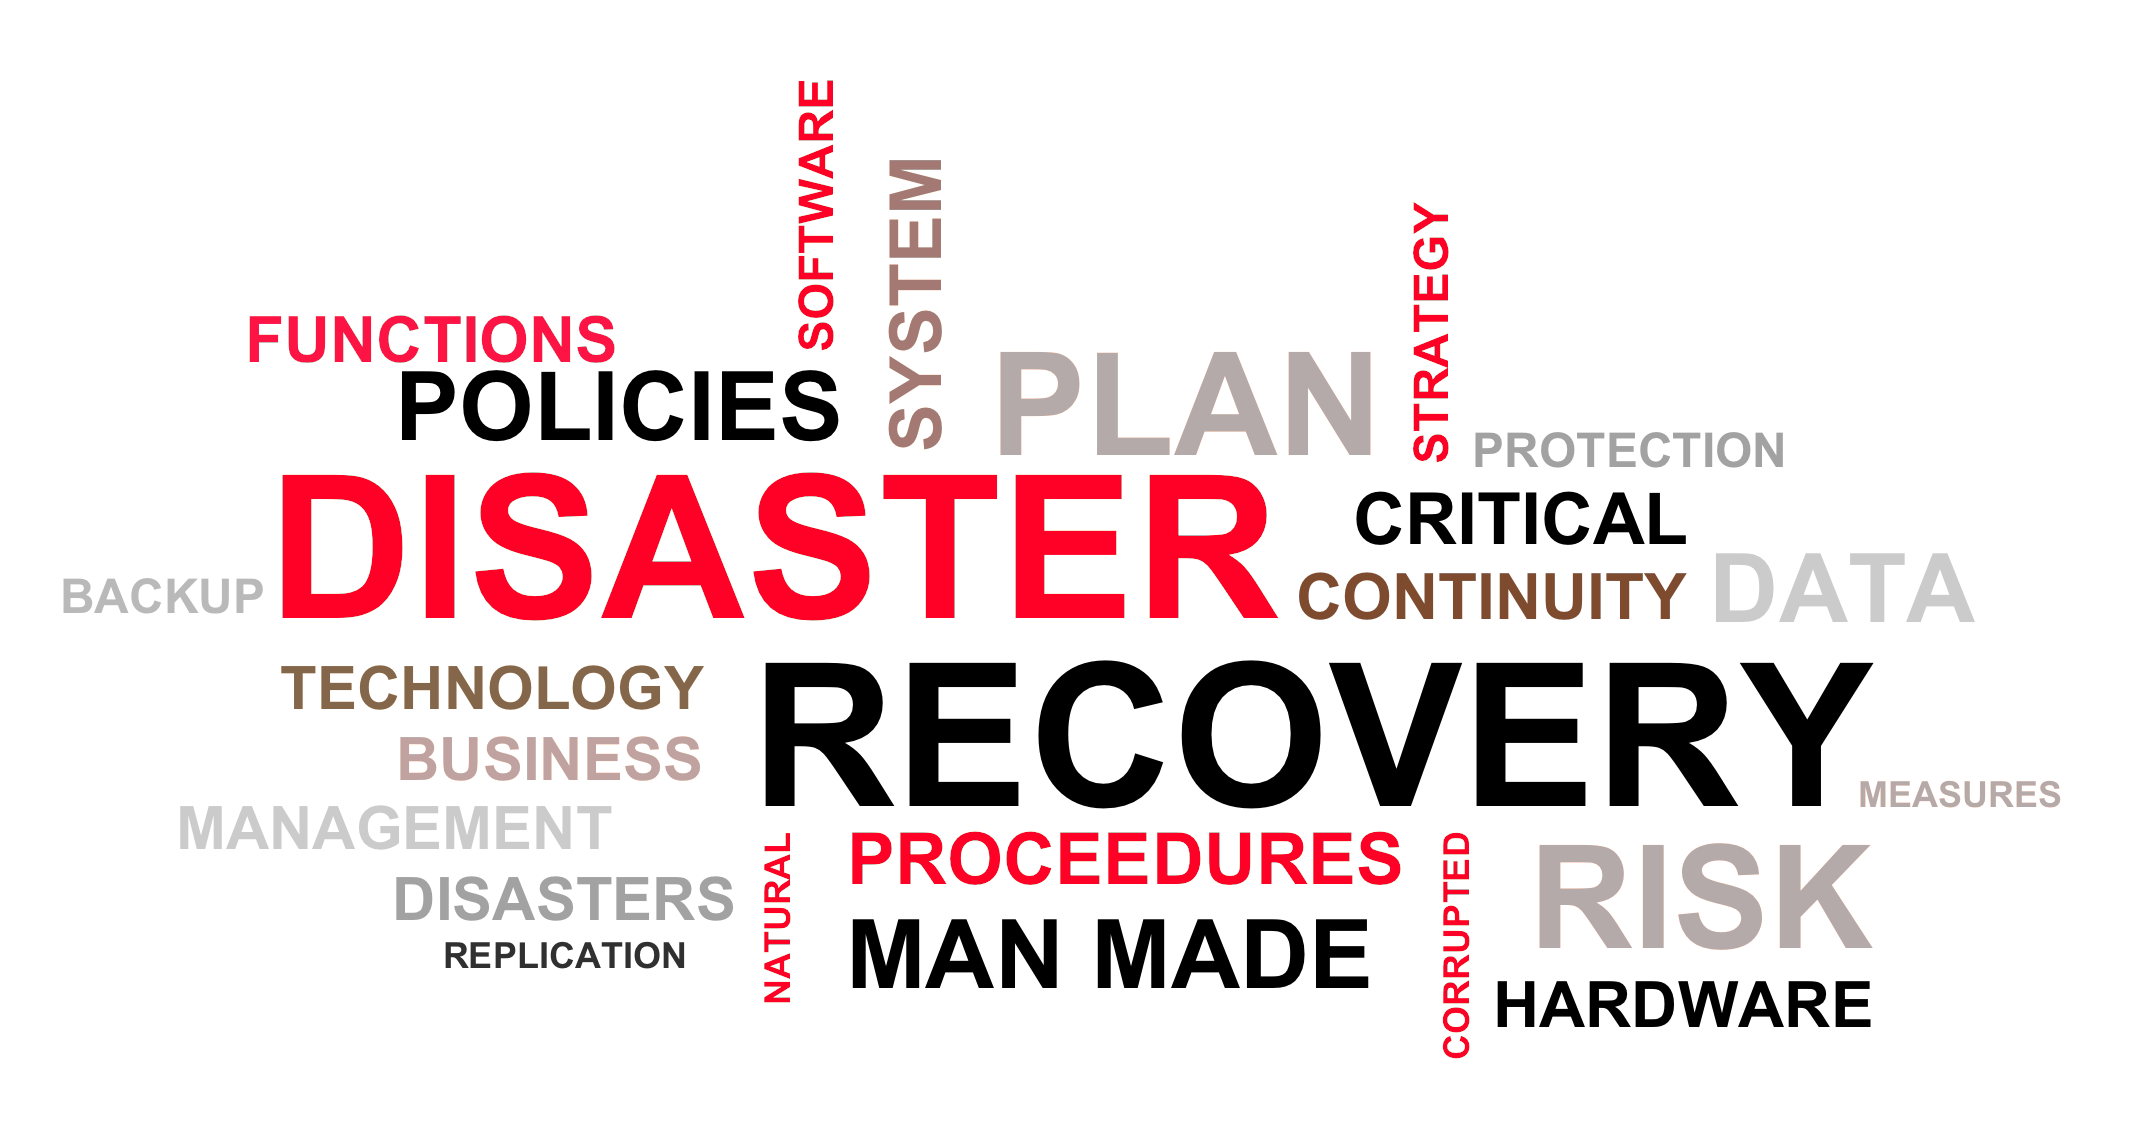 DisasterRecovery_tags_DRLM_Project